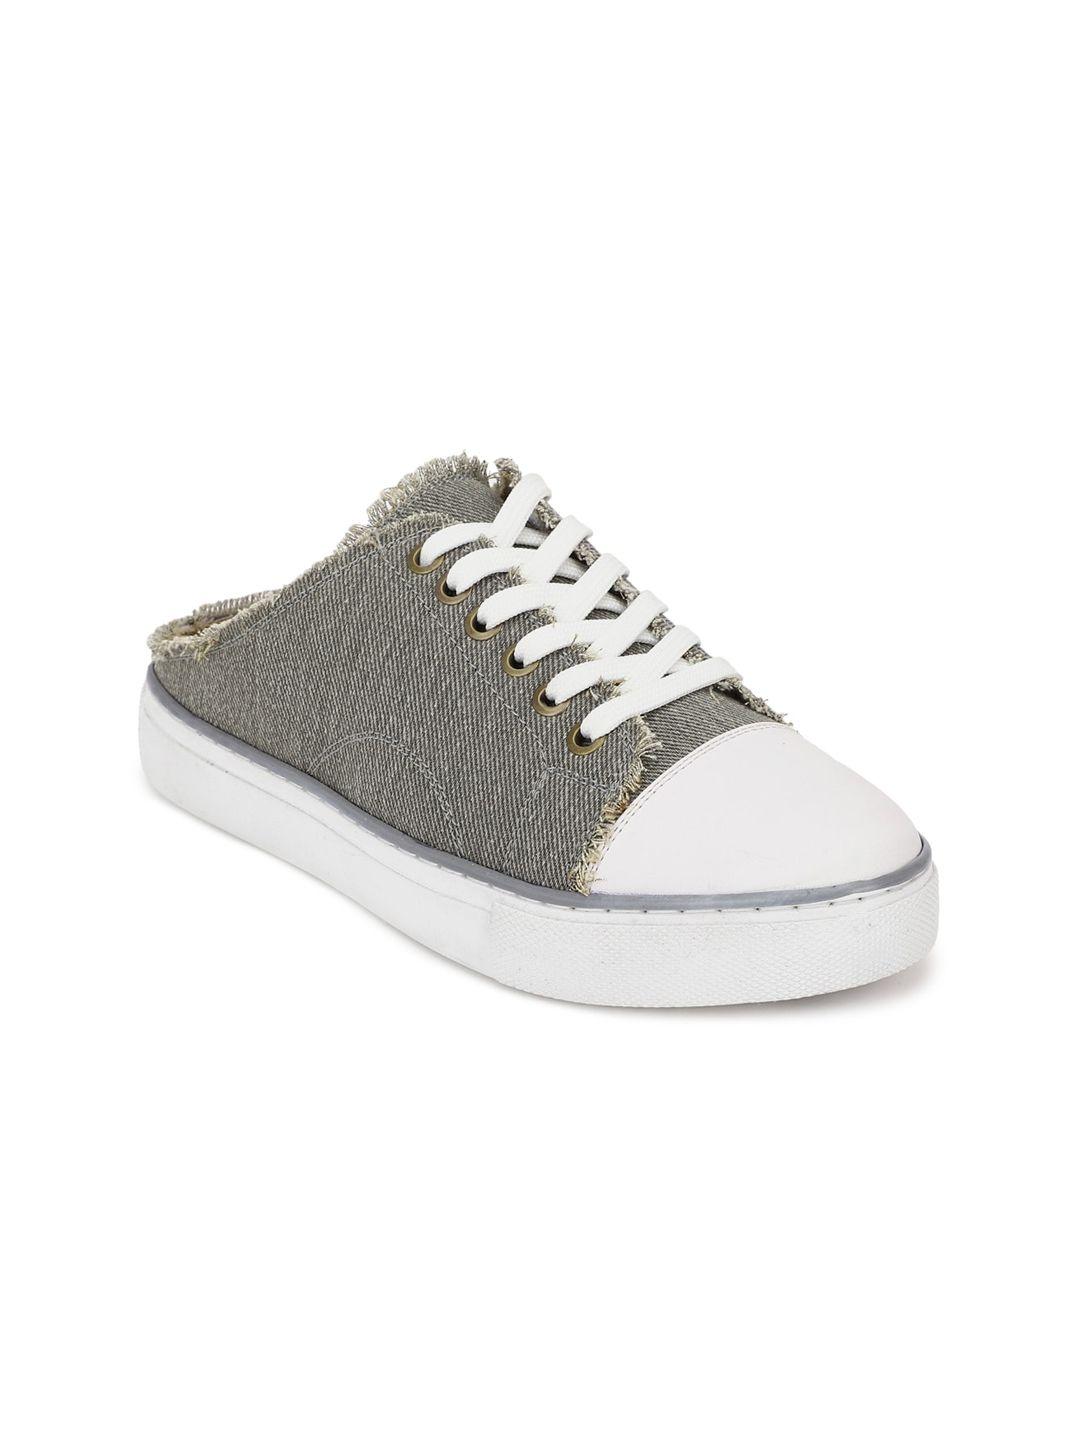 forever-21-women-grey-woven-design-pu-sneakers